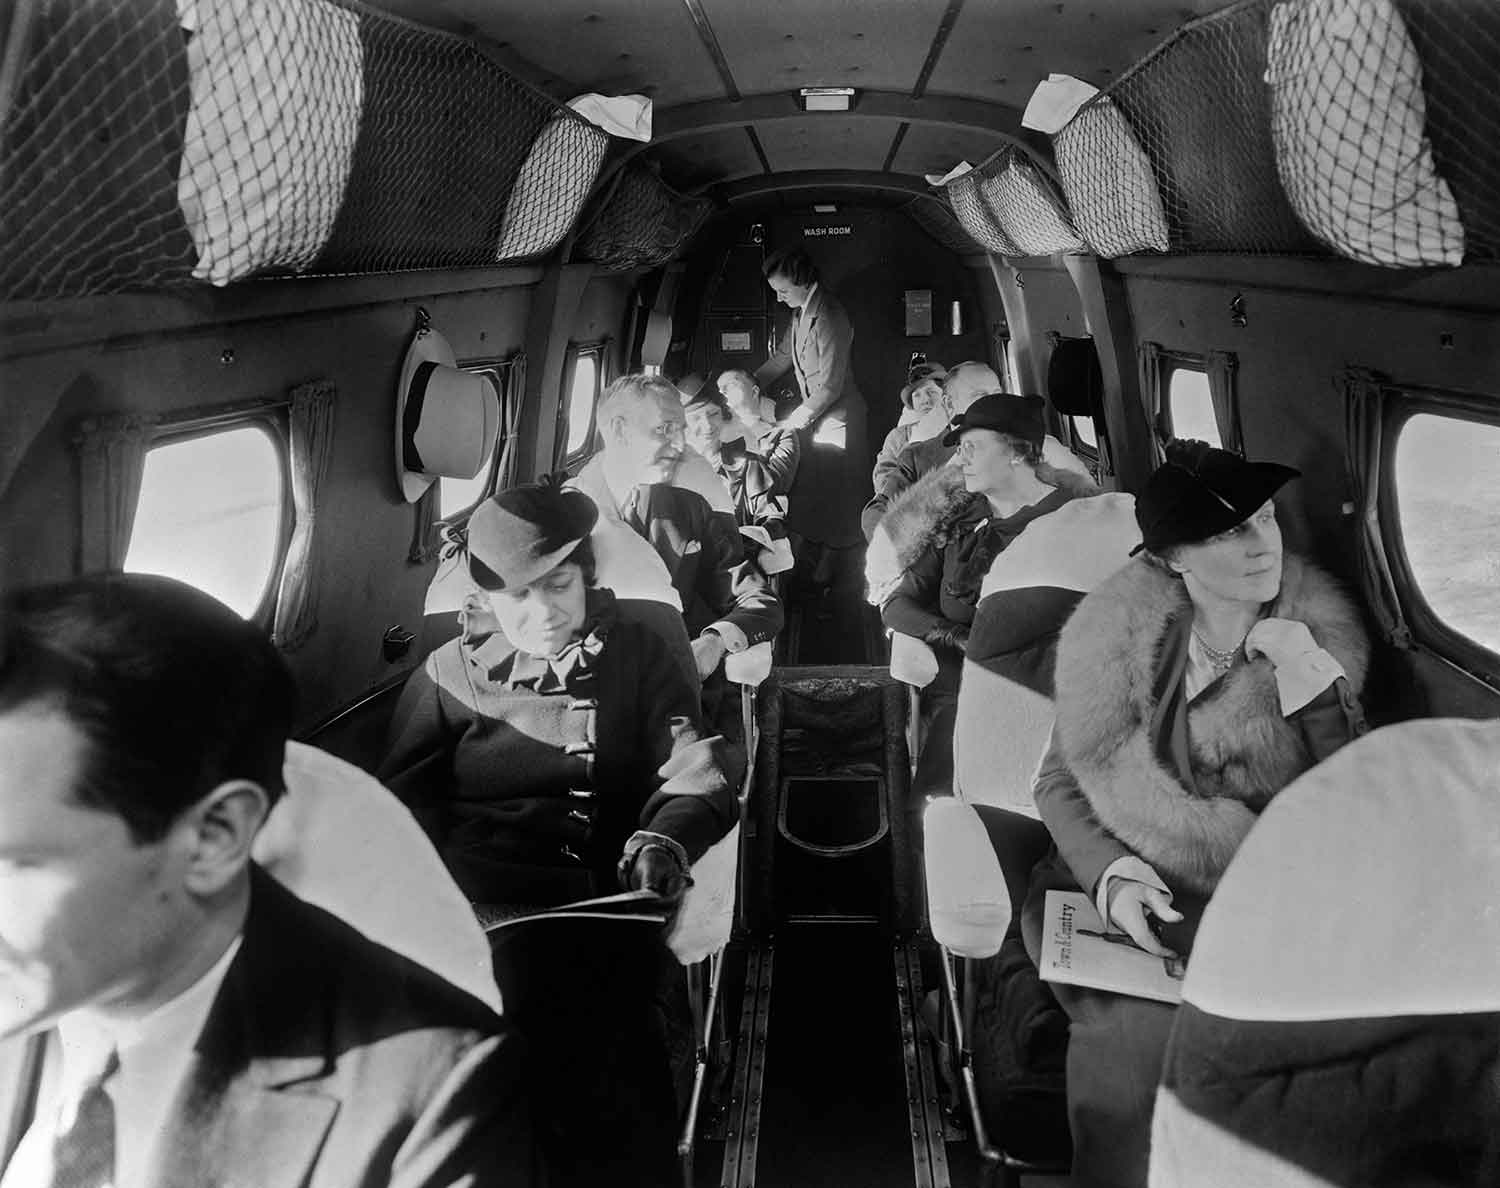 People dressed in 1930s clothing sit in a narrow passenger plane while a flight attendant stands in the aisle.